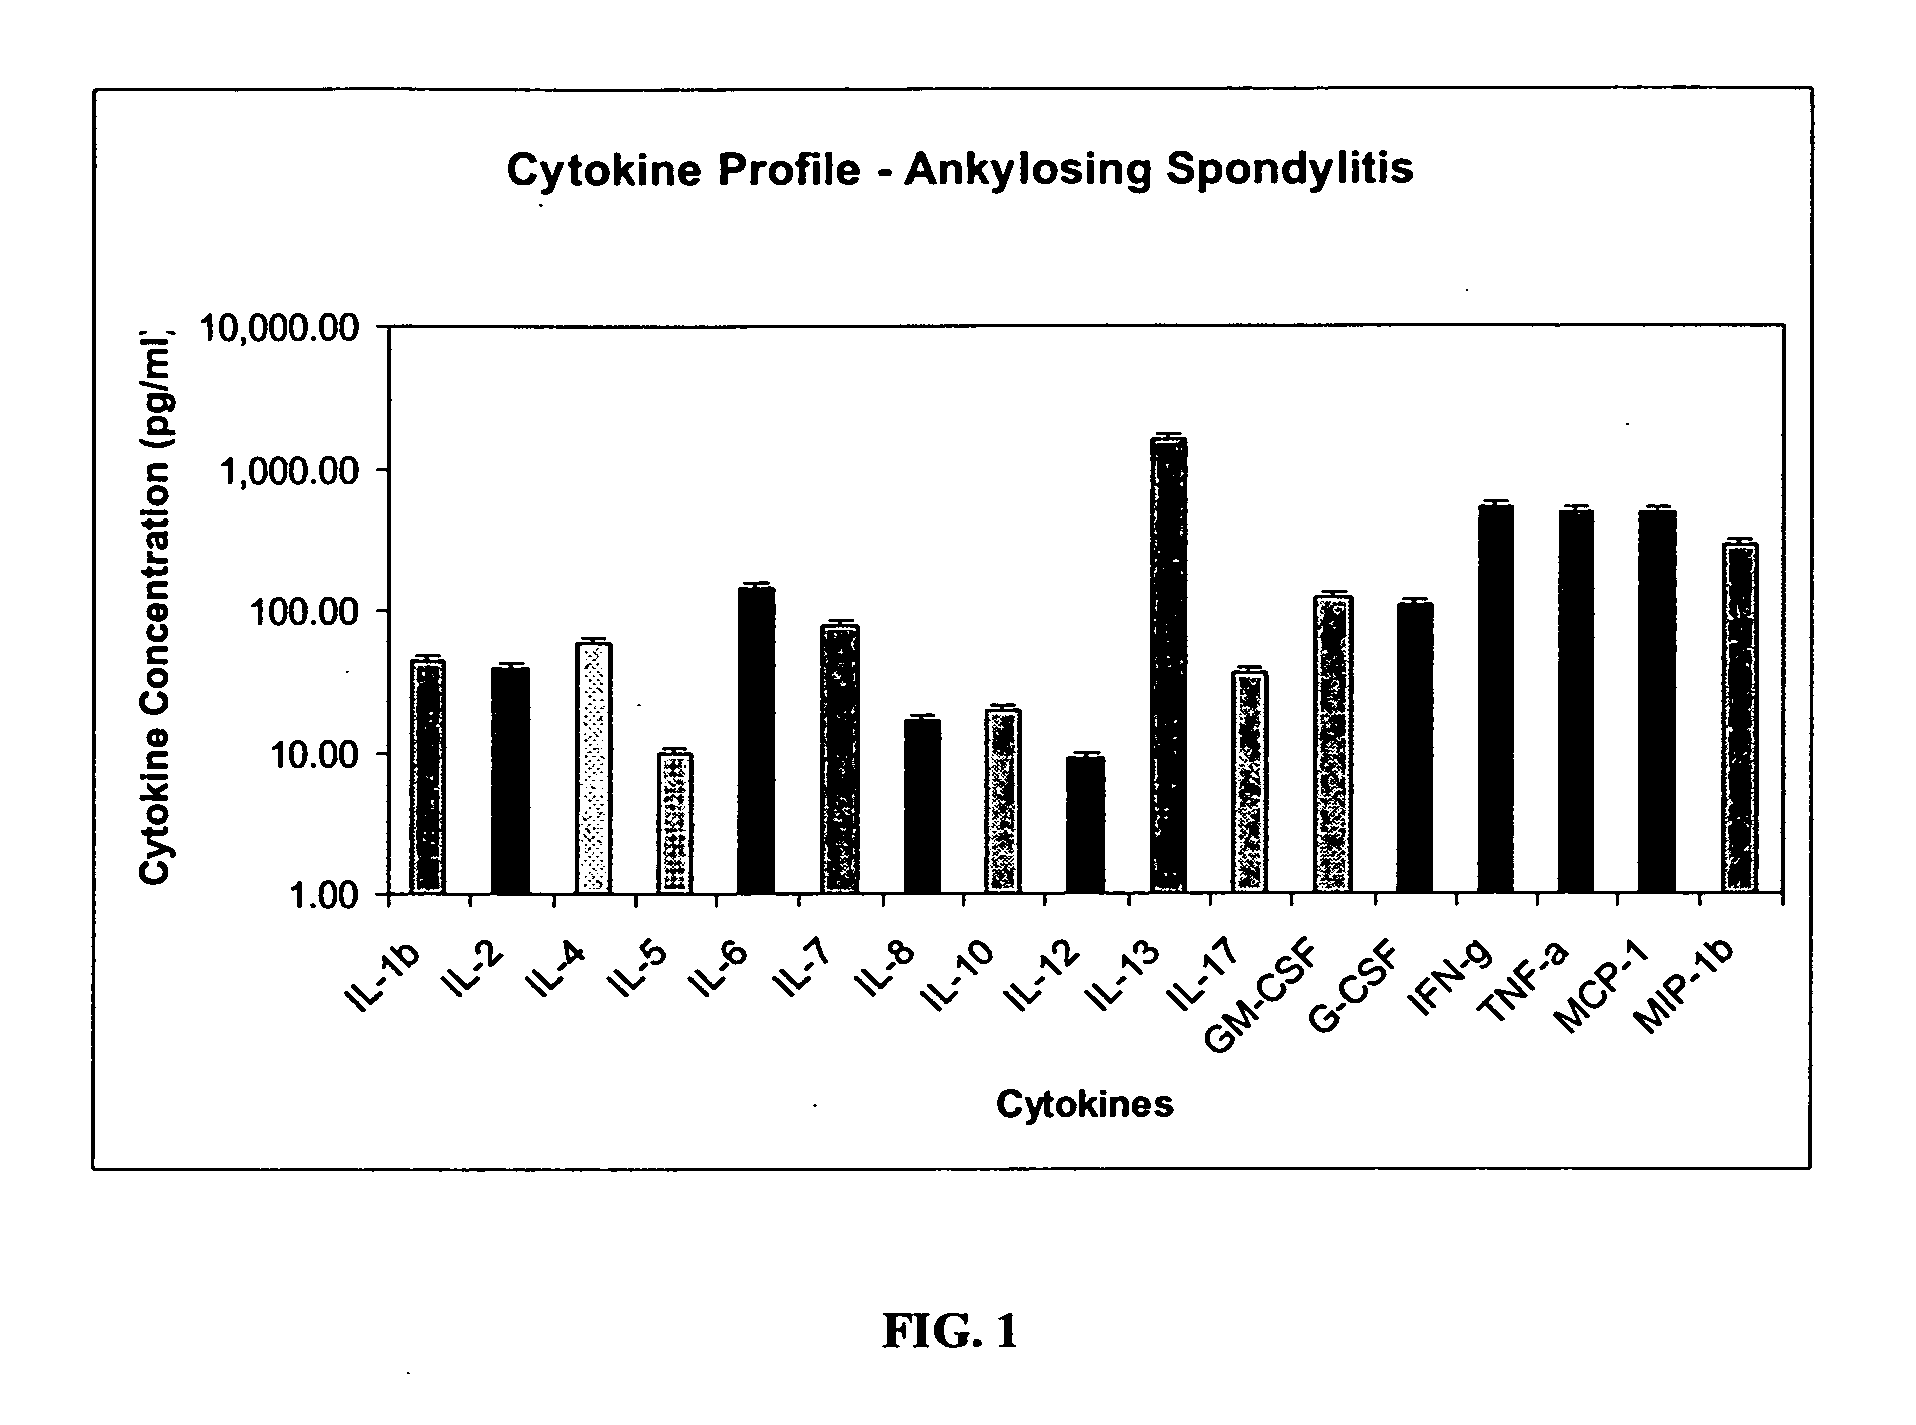 Method of using cytokine assays to diagnose treat, and evaluate inflammatory and autoimmune diseases